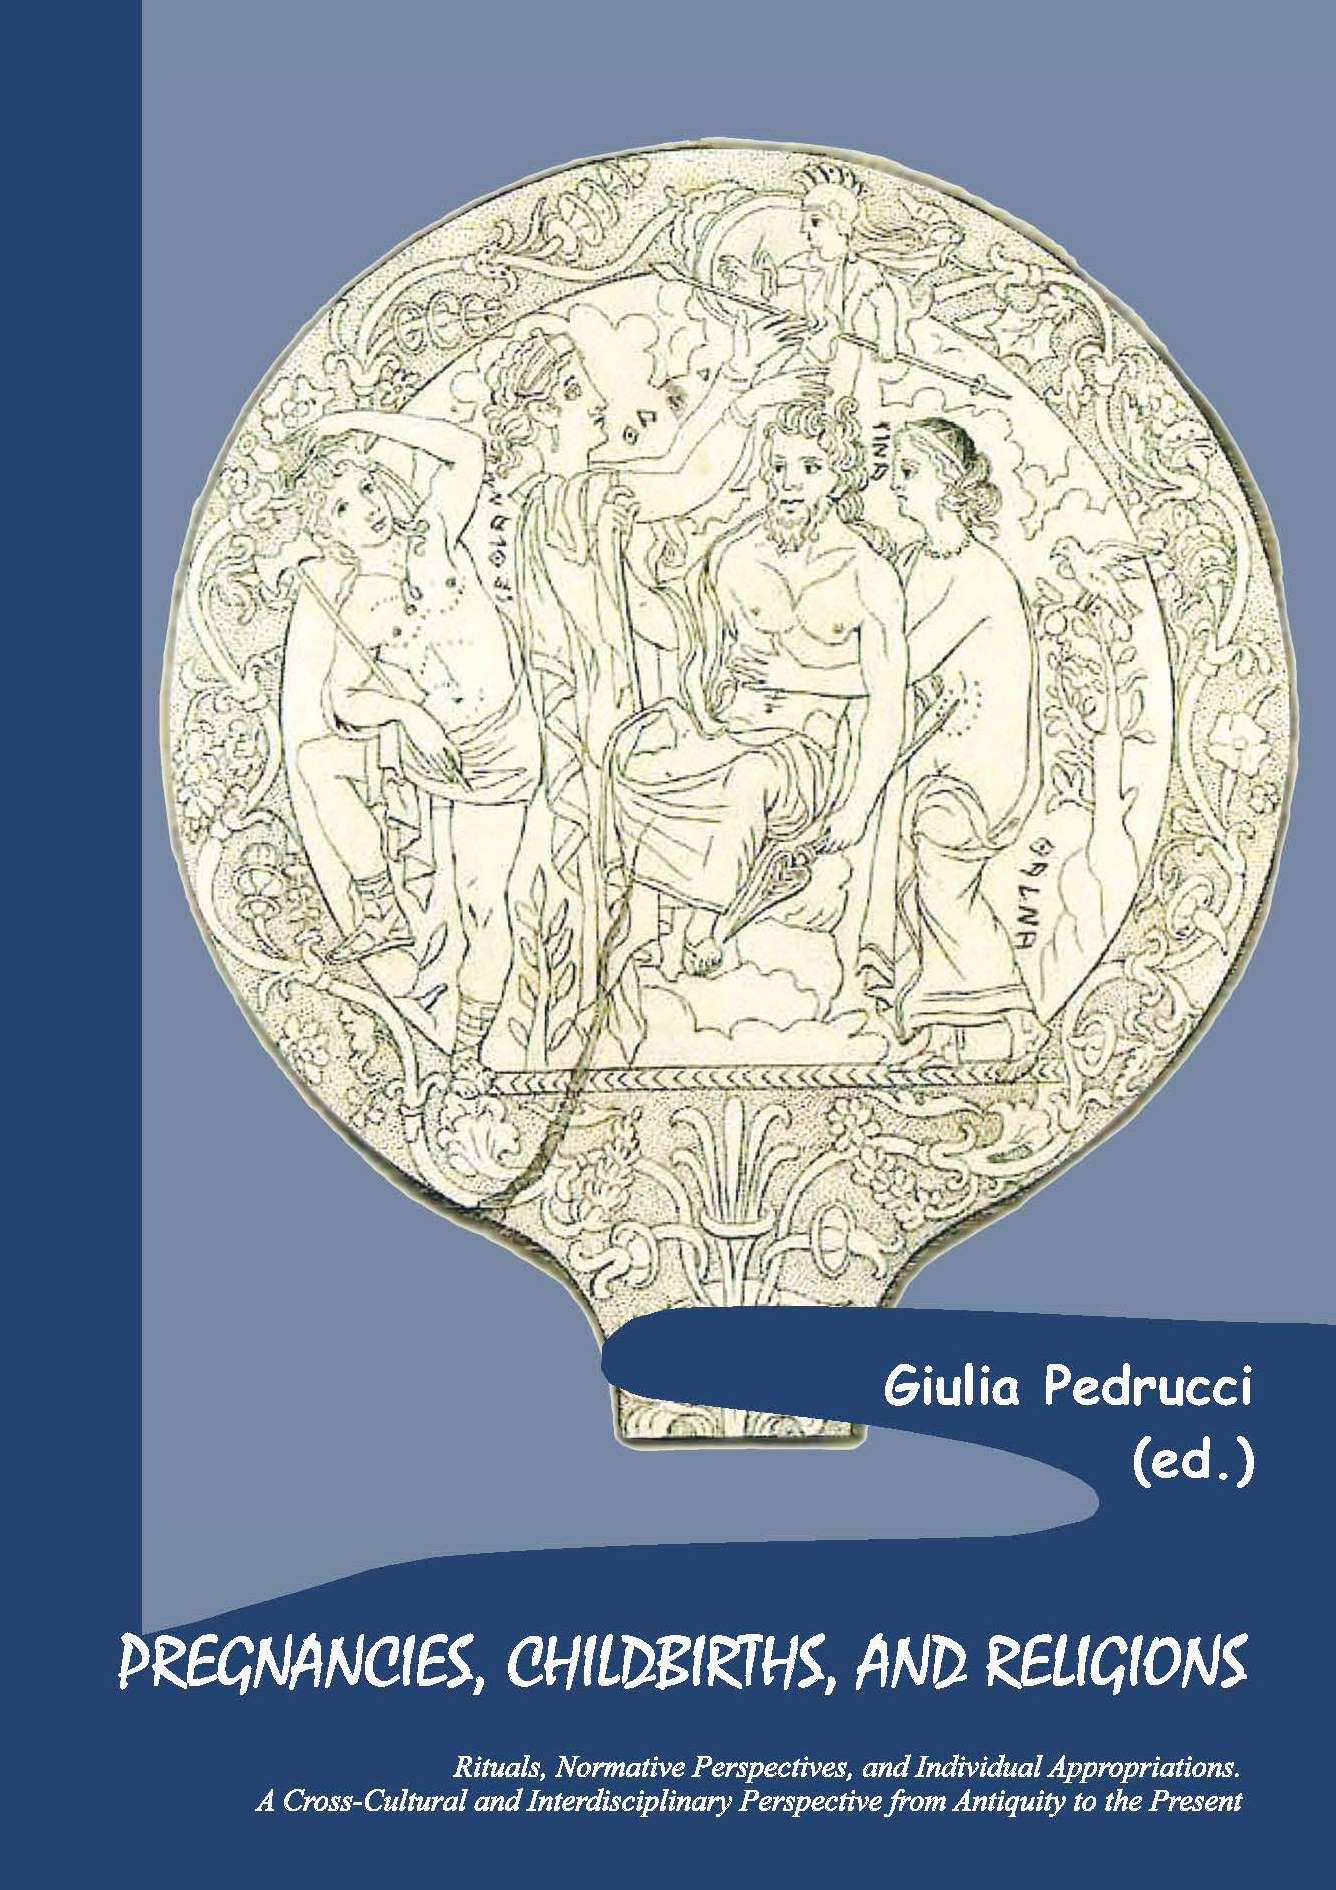 PREGNANCIES, CHILDBIRTHS, AND RELIGIONS
Rituals, Normative Perspectives, and Individual Appropriations. A Cross-Cultural and Interdisciplinary Perspective from Antiquity to the Present - Sacra publica et privata 10 

